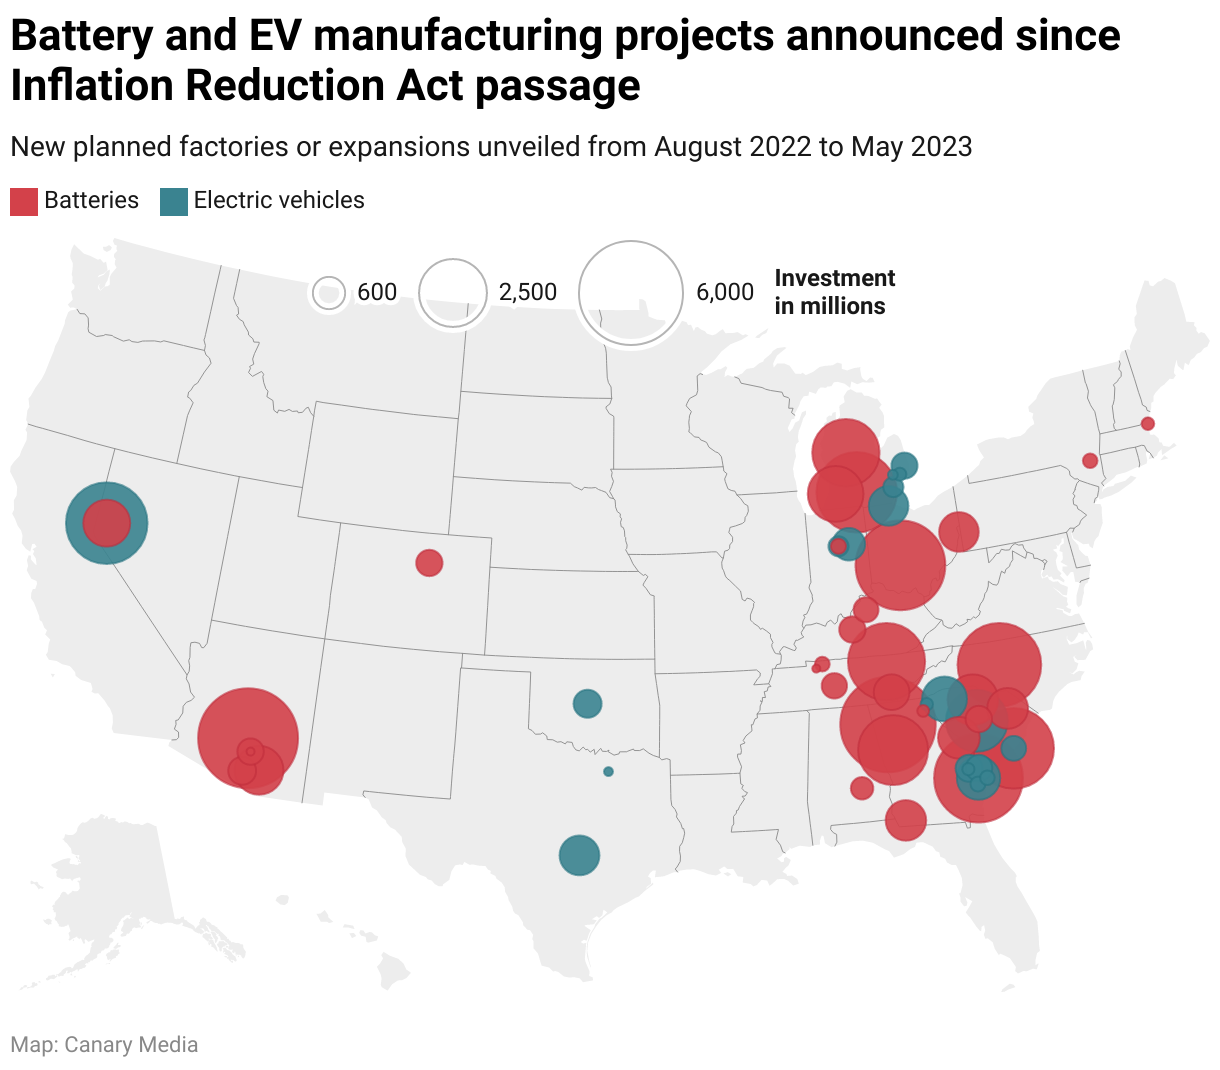 Battery and EV manufacturing projects announced since Inflation Reduction Act passage map of the US.